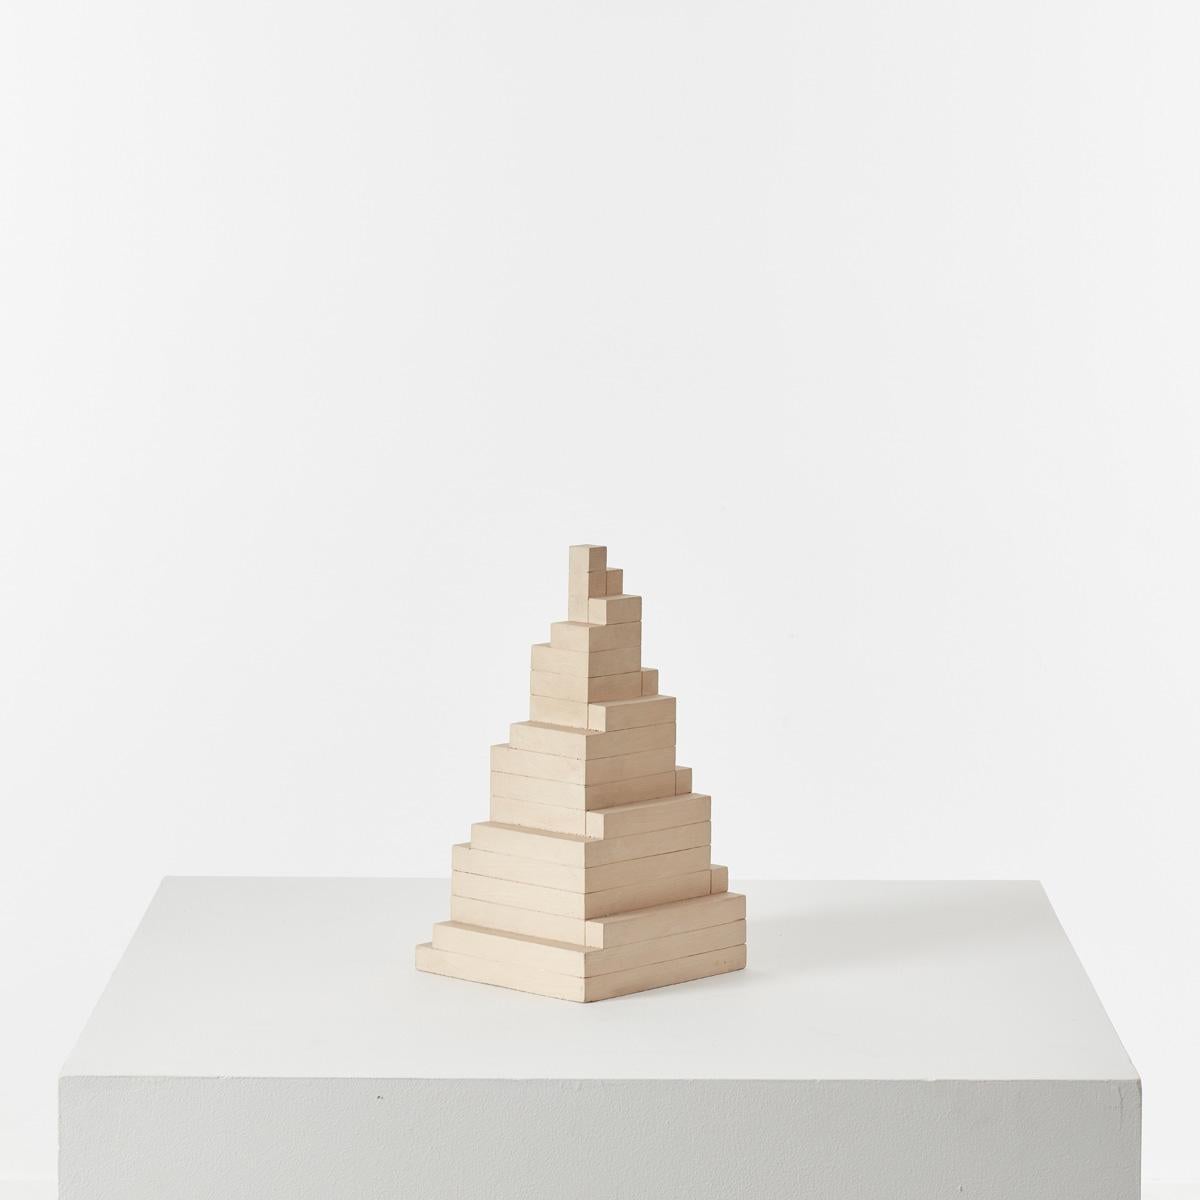 This lovely architectural sculpture by Dutch artist Gert Jan Verhoog has been precisely sculpted from painted wood. Its body is formed through the stacking of rectangular pieces scaling down in volume from the base to the top, reaching a point of